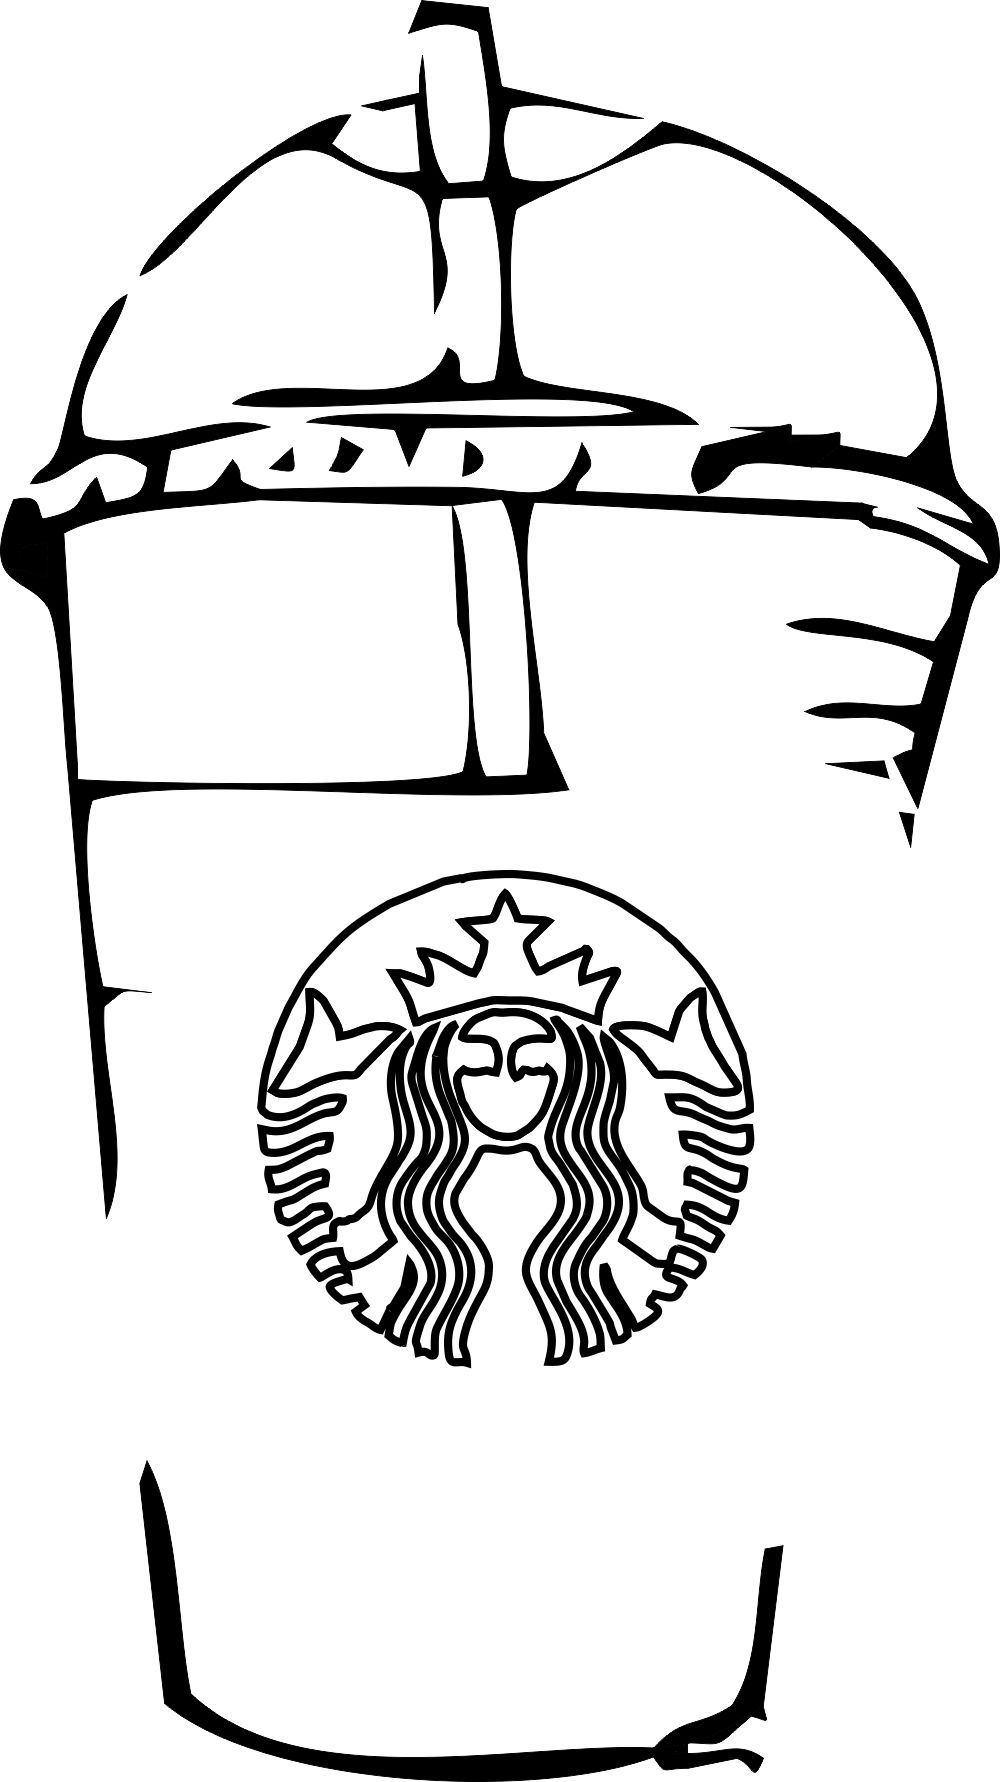 Starbucks Coloring Pages to Print | Activity Shelter